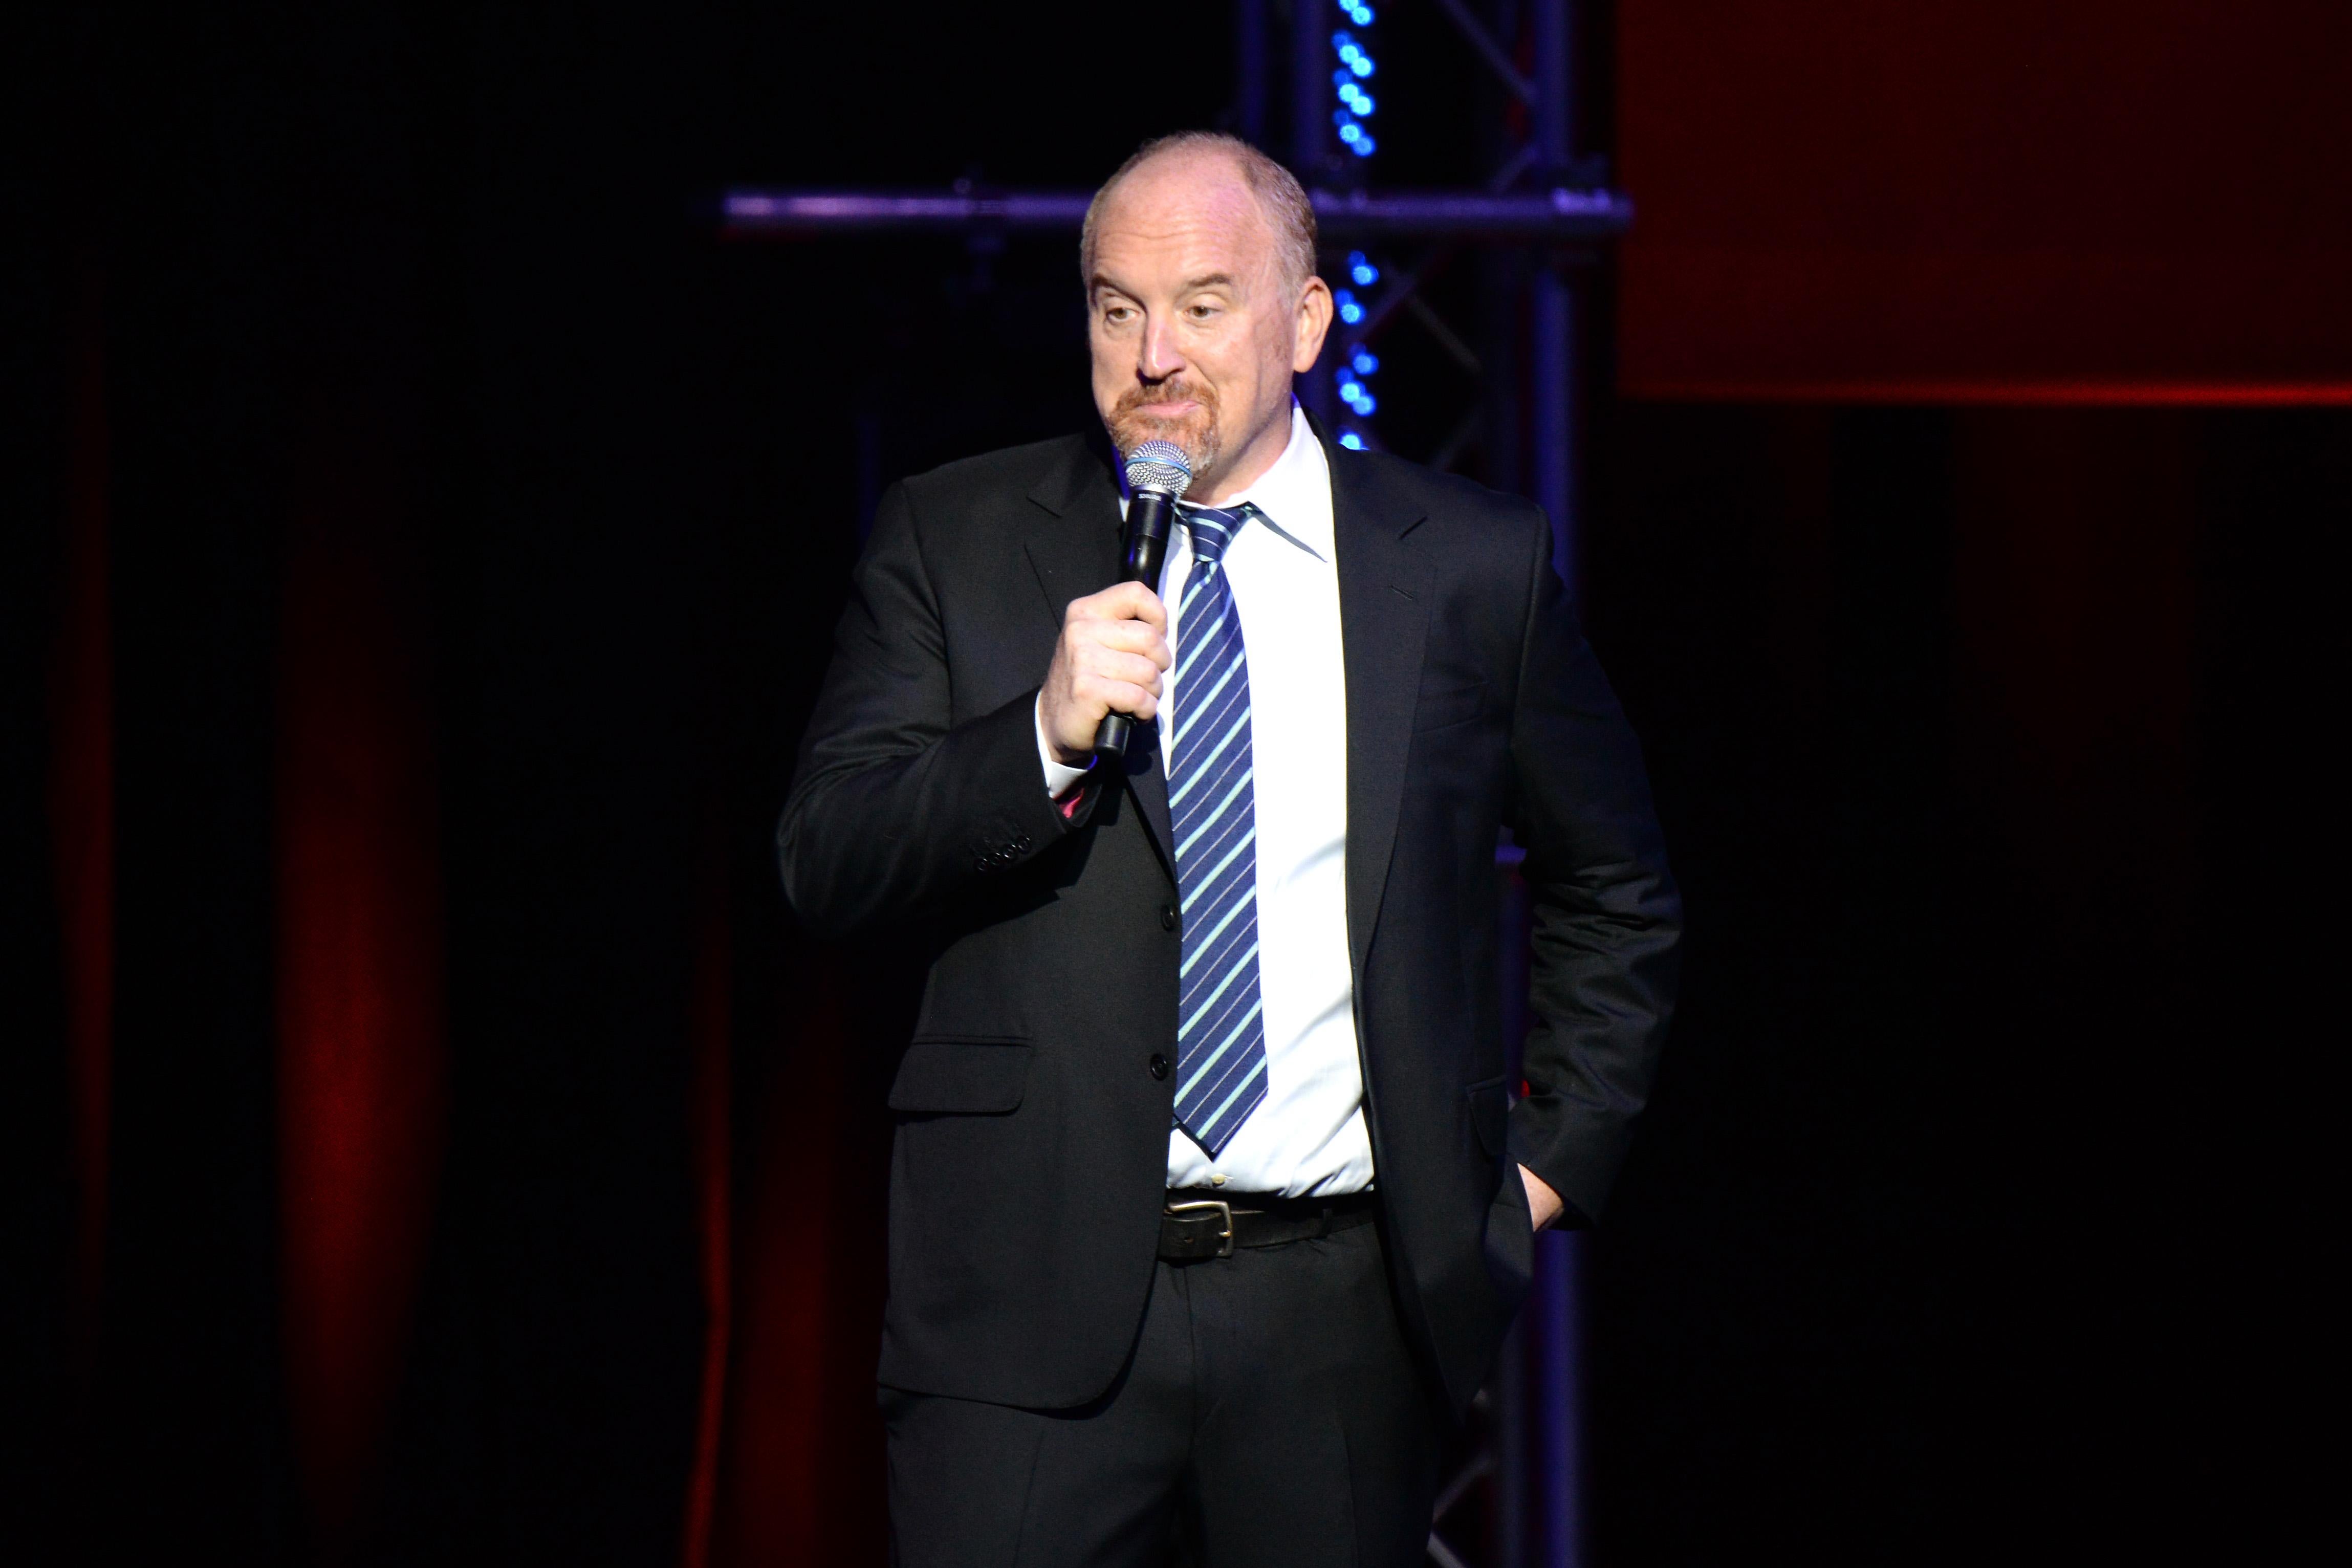 Louis C.K. wearing a suit with a blue tie, with a microphone in his right hand